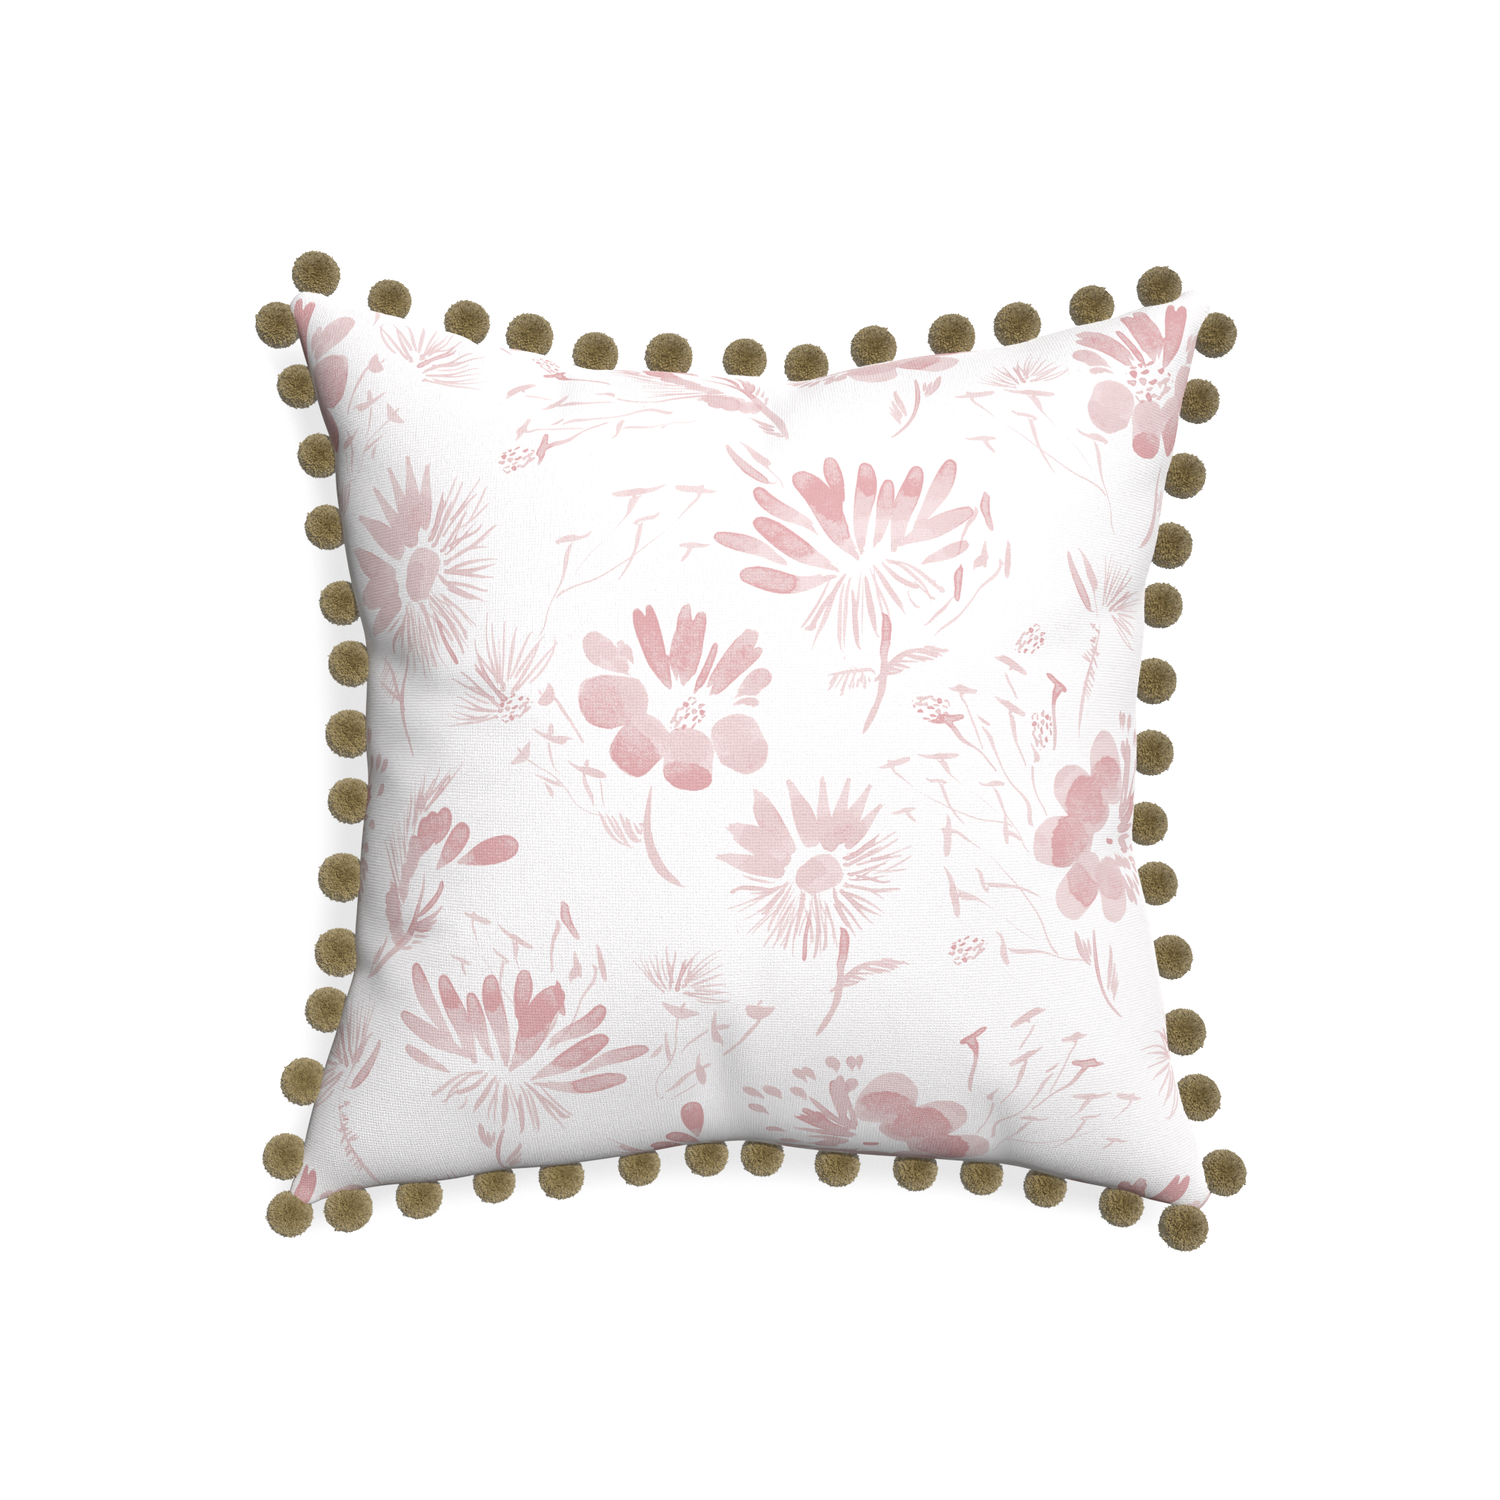 20-square blake custom pink floralpillow with olive pom pom on white background